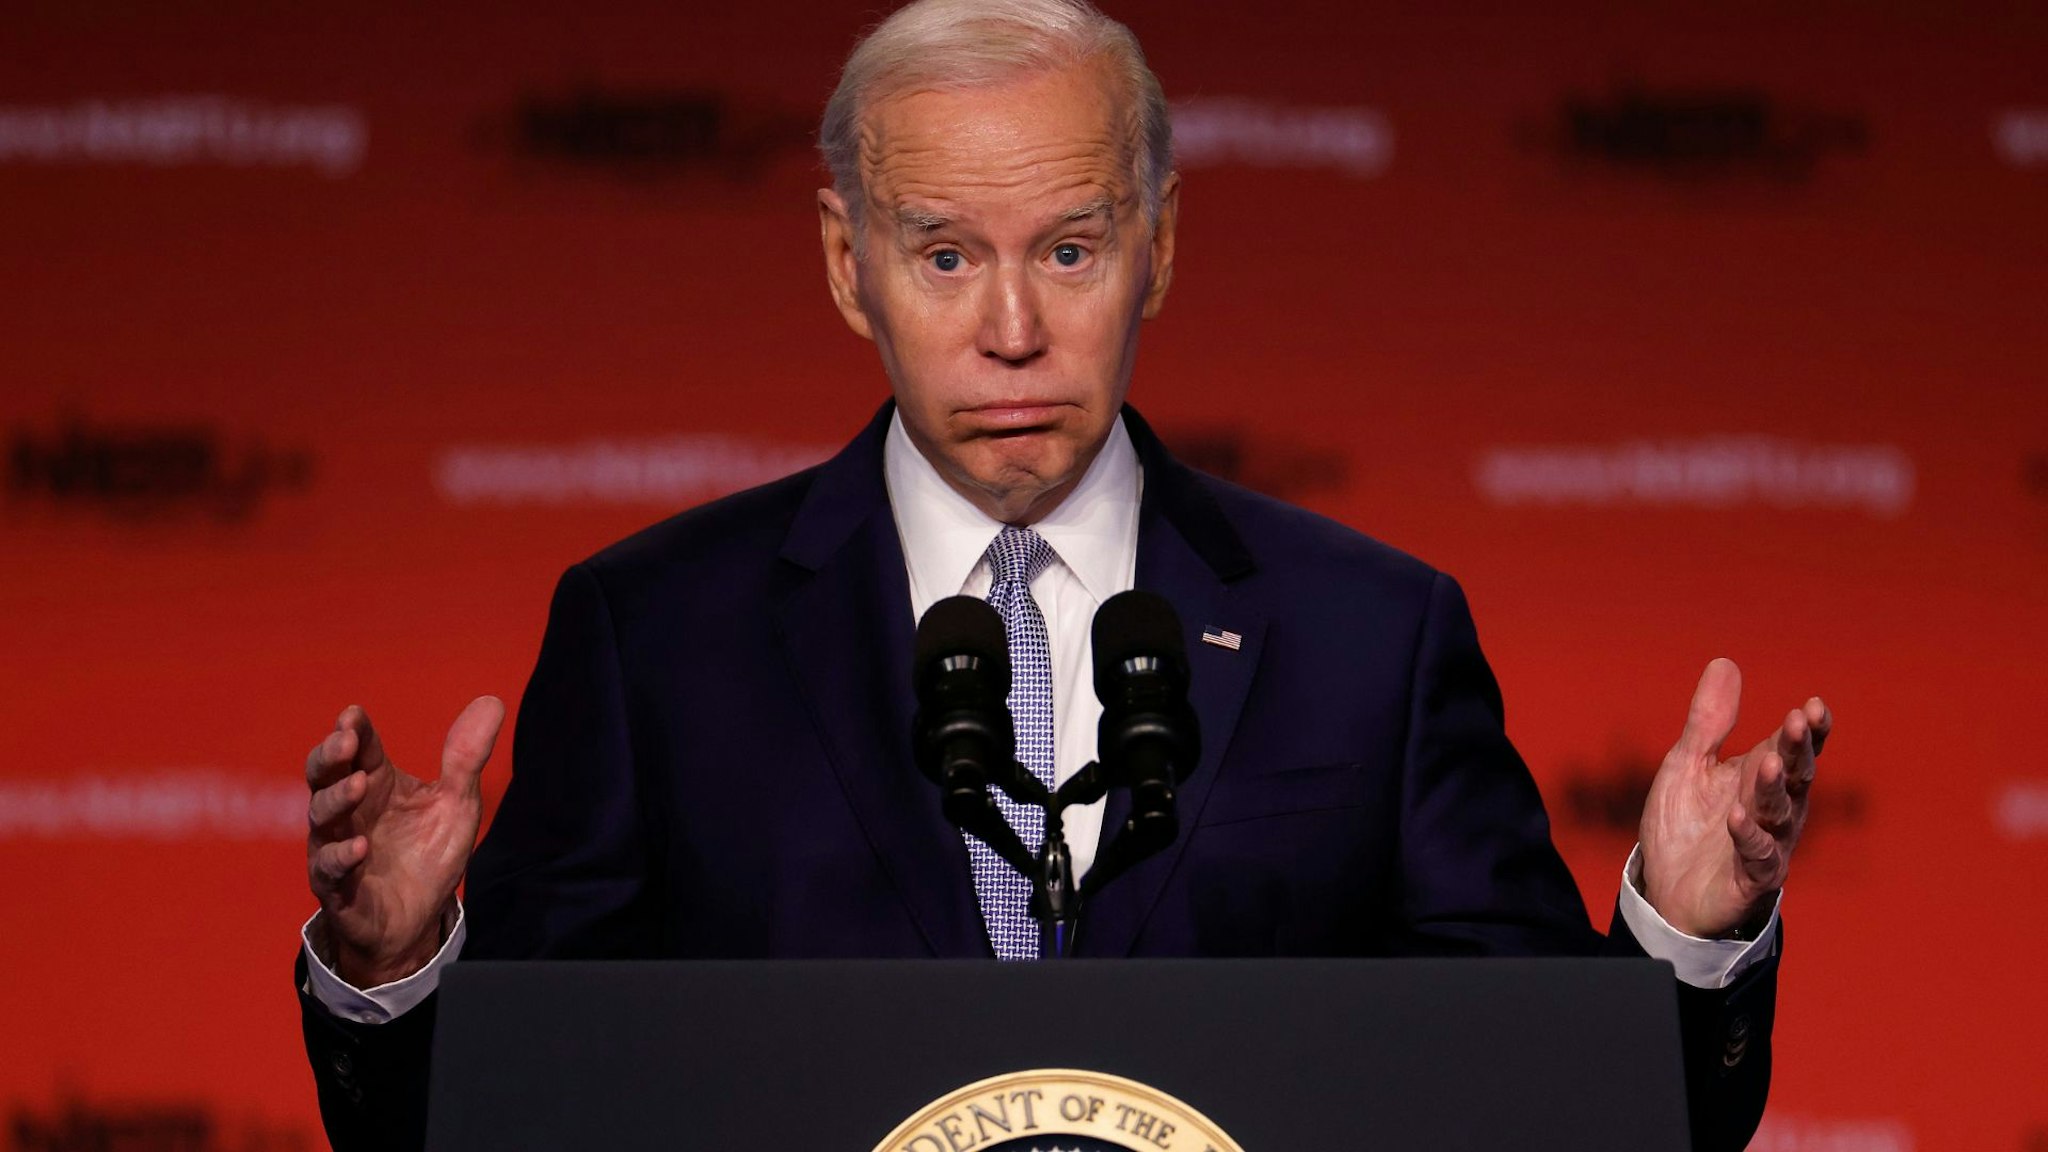 WASHINGTON, DC - APRIL 25: U.S. President Joe Biden addresses the North America's Building Trades Unions legislative conference at the Washington Hilton on April 25, 2023 in Washington, DC. Earlier in the day, Biden released a video where he officially announced his re-election campaign.